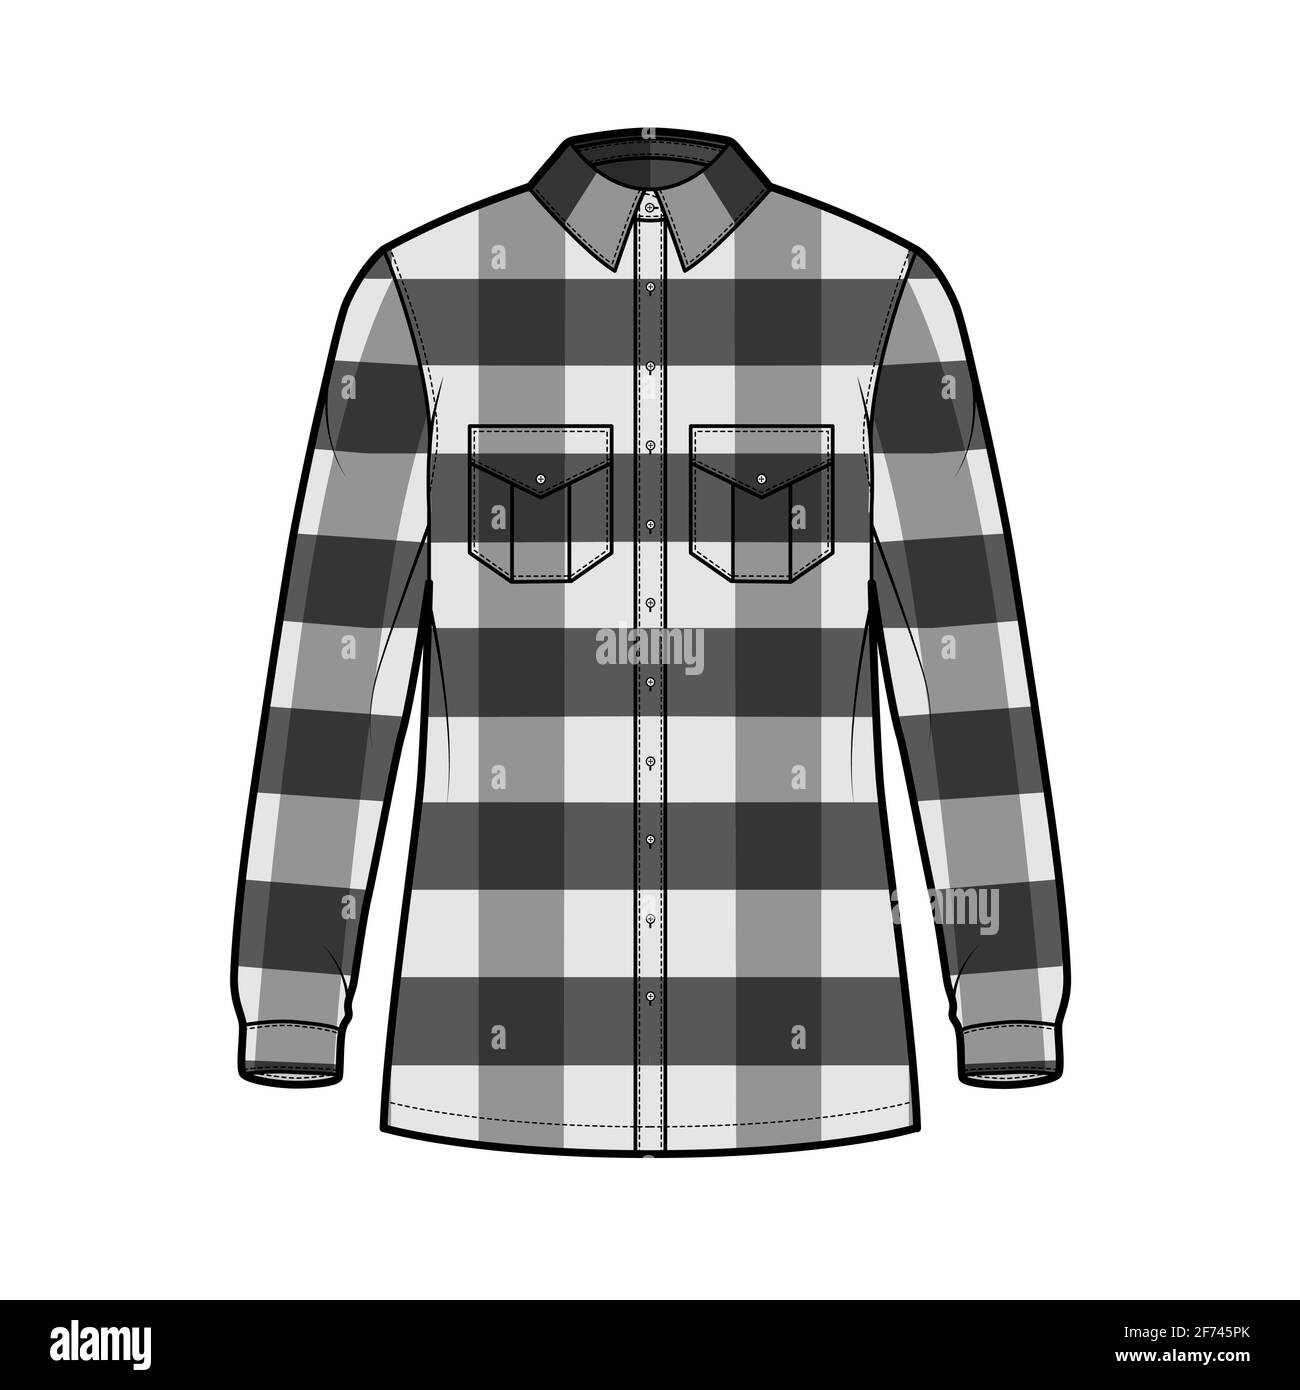 Lumber jacket technical fashion illustration with Buffalo Check motif, oversized body, flap pockets, button closure, long sleeves. Flat apparel front, grey color style. Women, men unisex CAD mockup Stock Vector